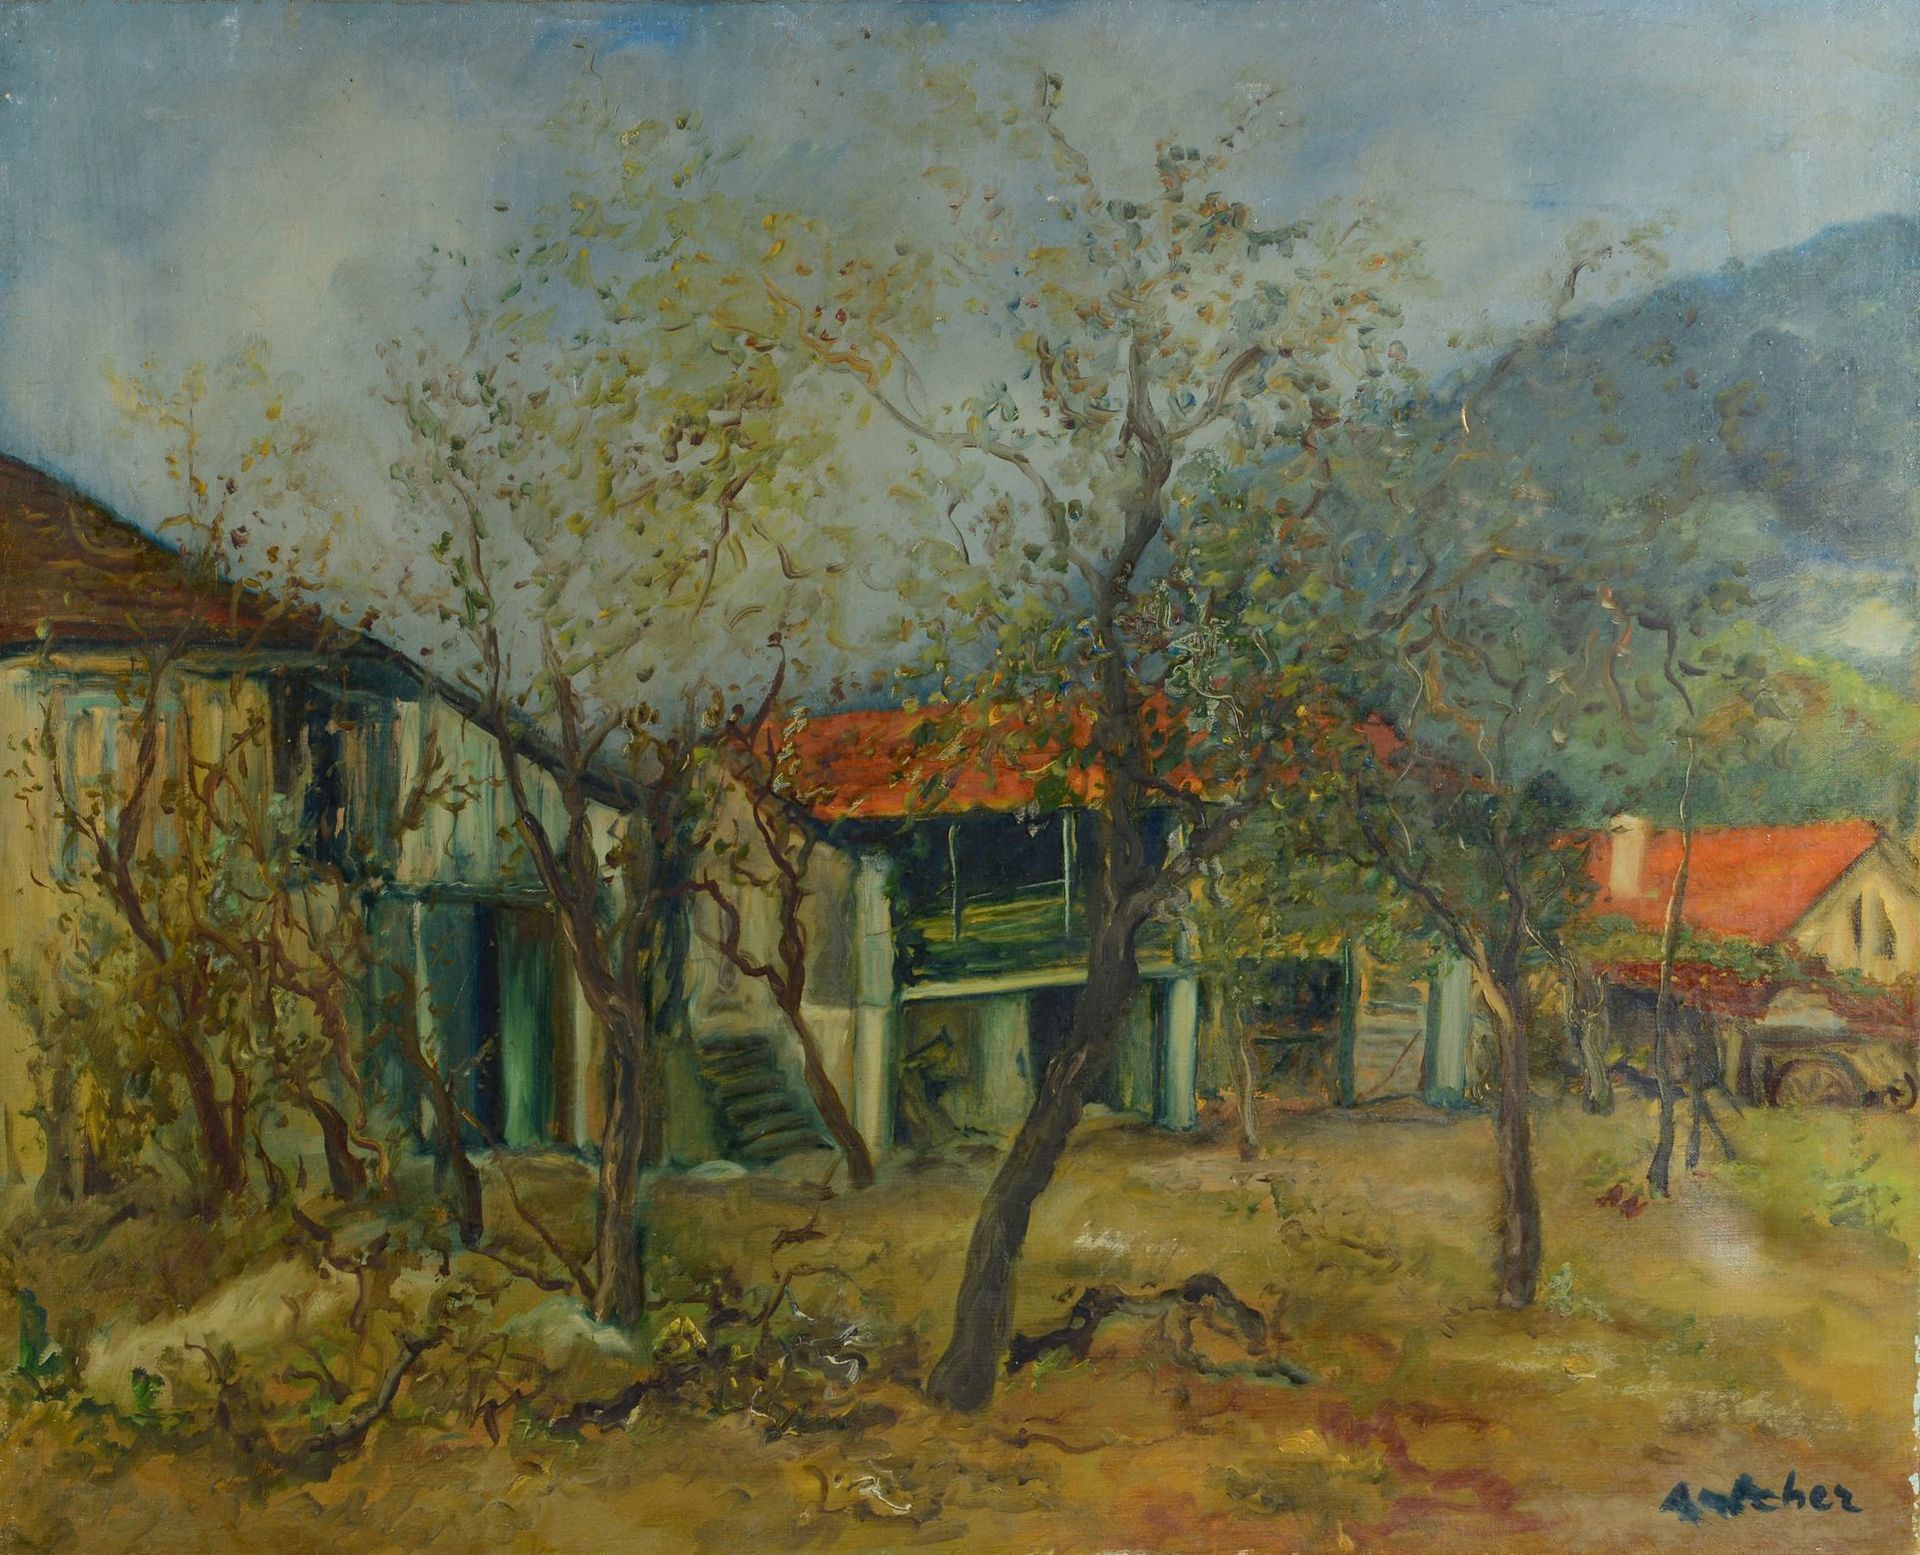 Null Isaac ANTCHER (1899 - 1992) - The farm - Oil on canvas, signed lower right &hellip;